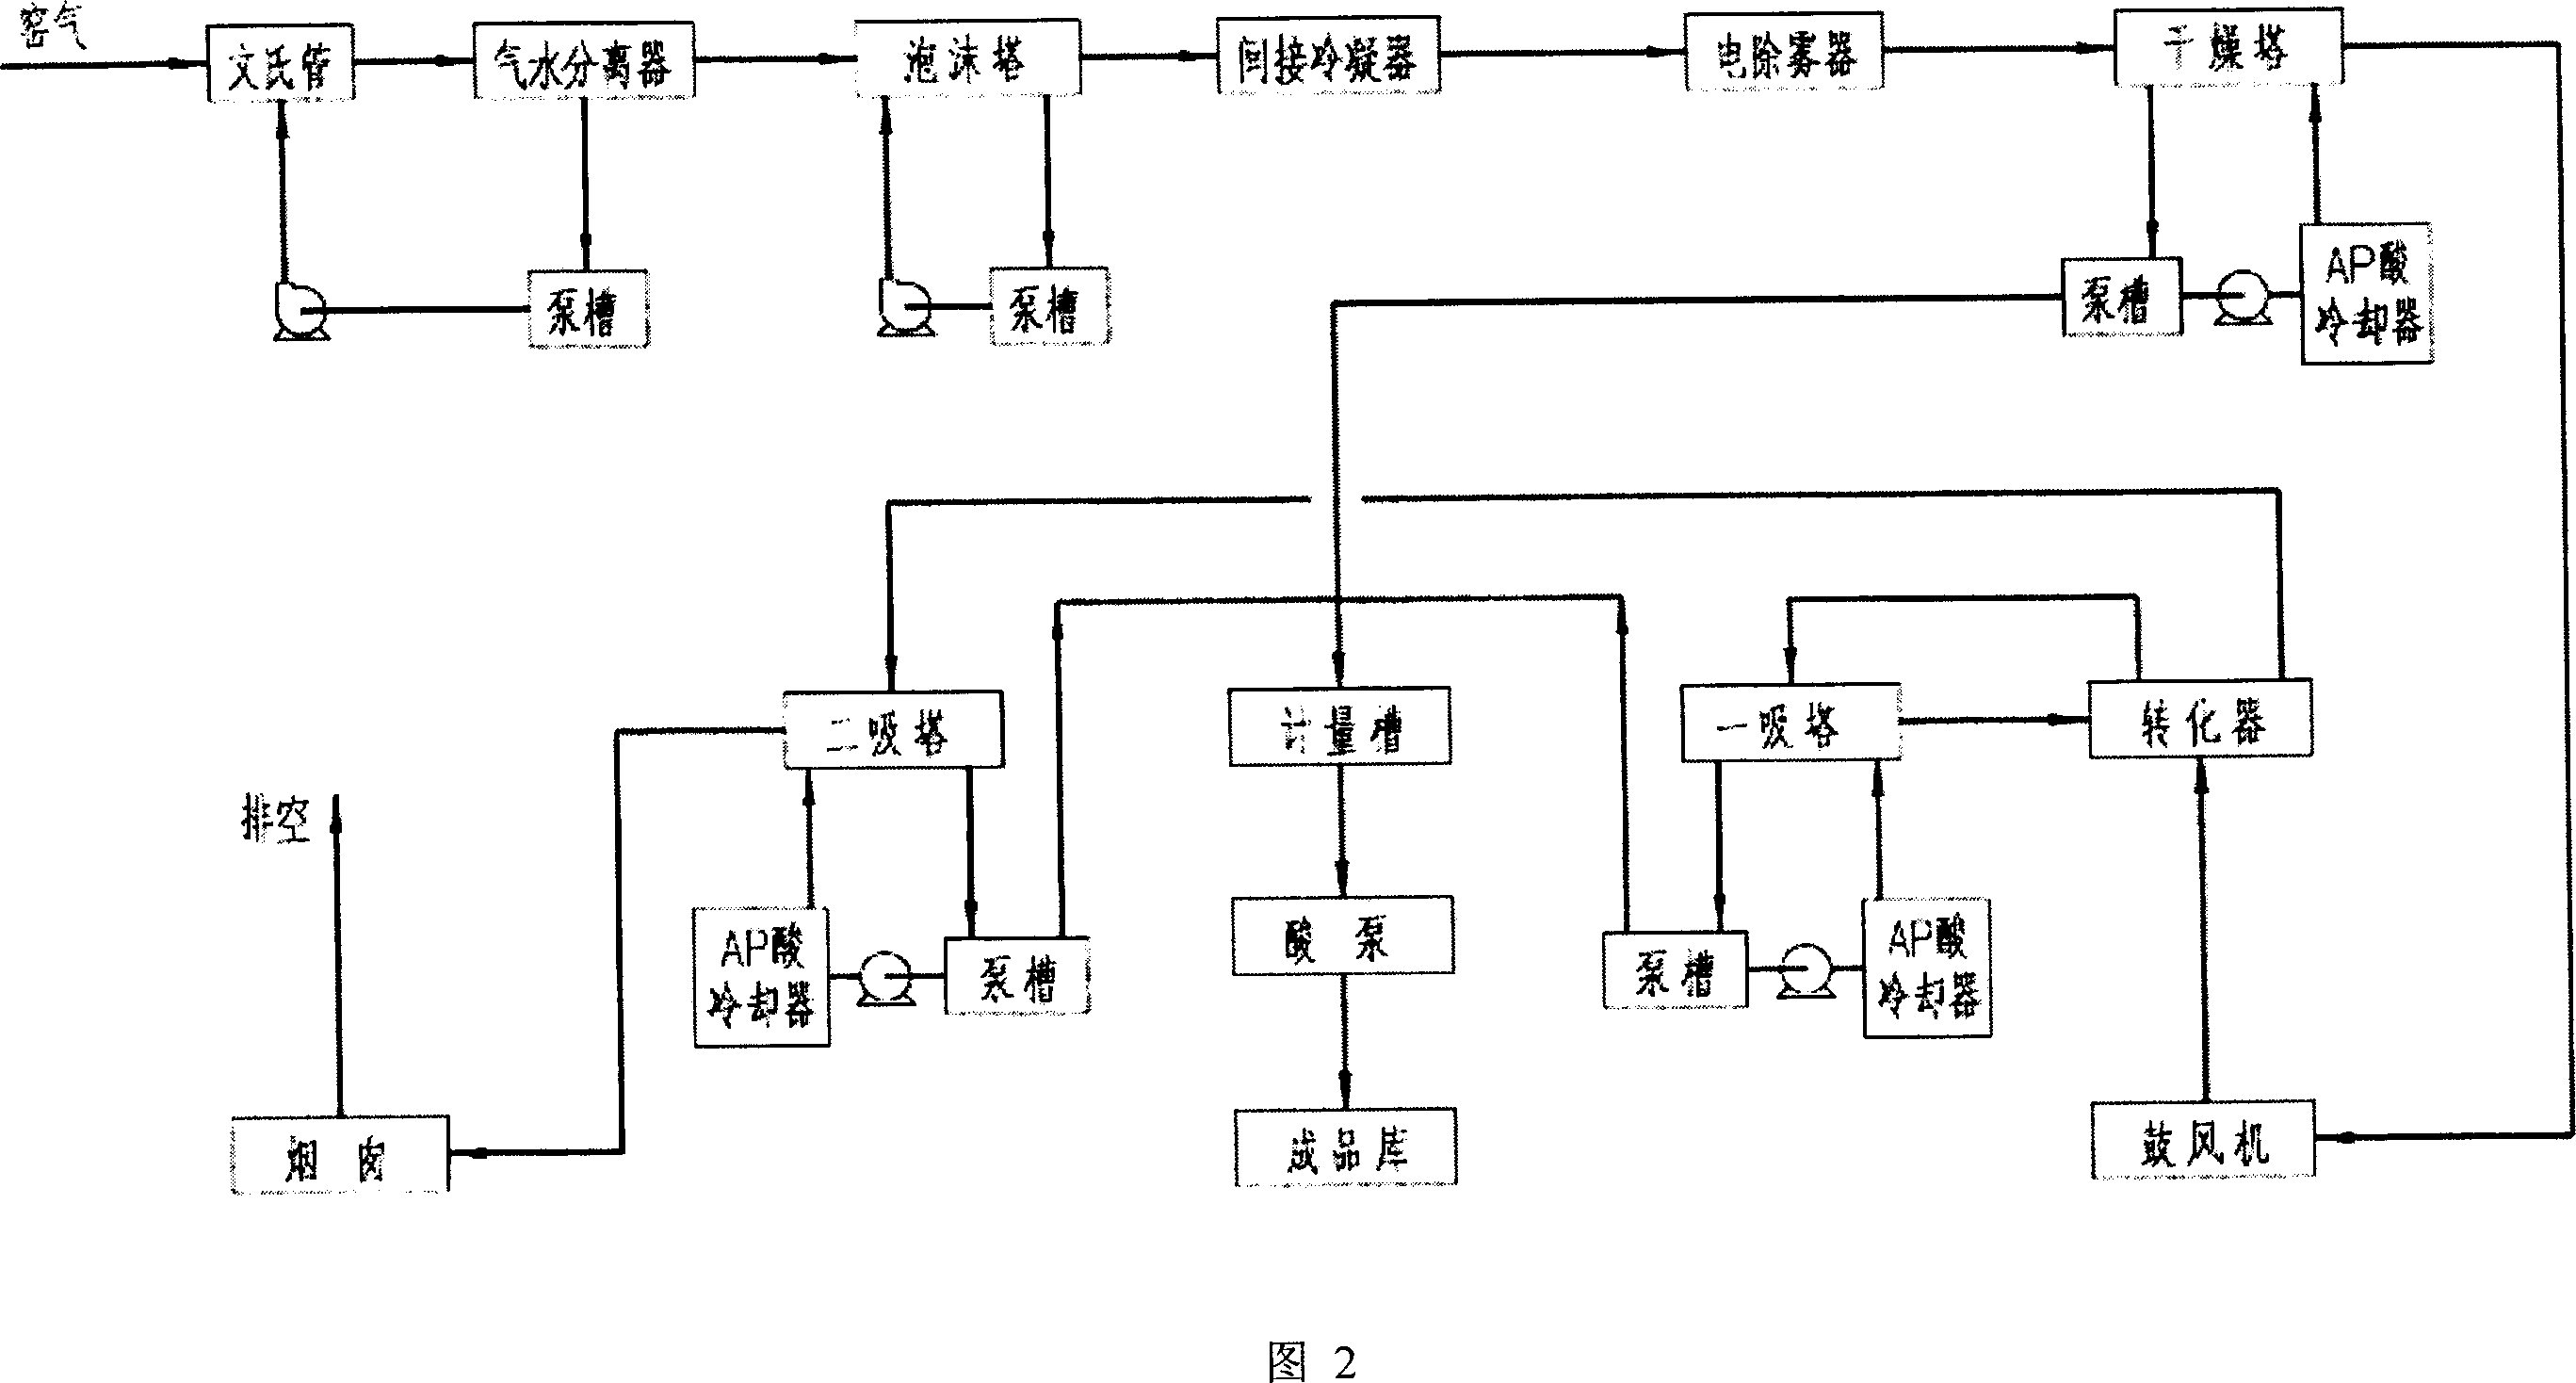 Method for producing cement and vitriol from desulfurized gesso of flue gas